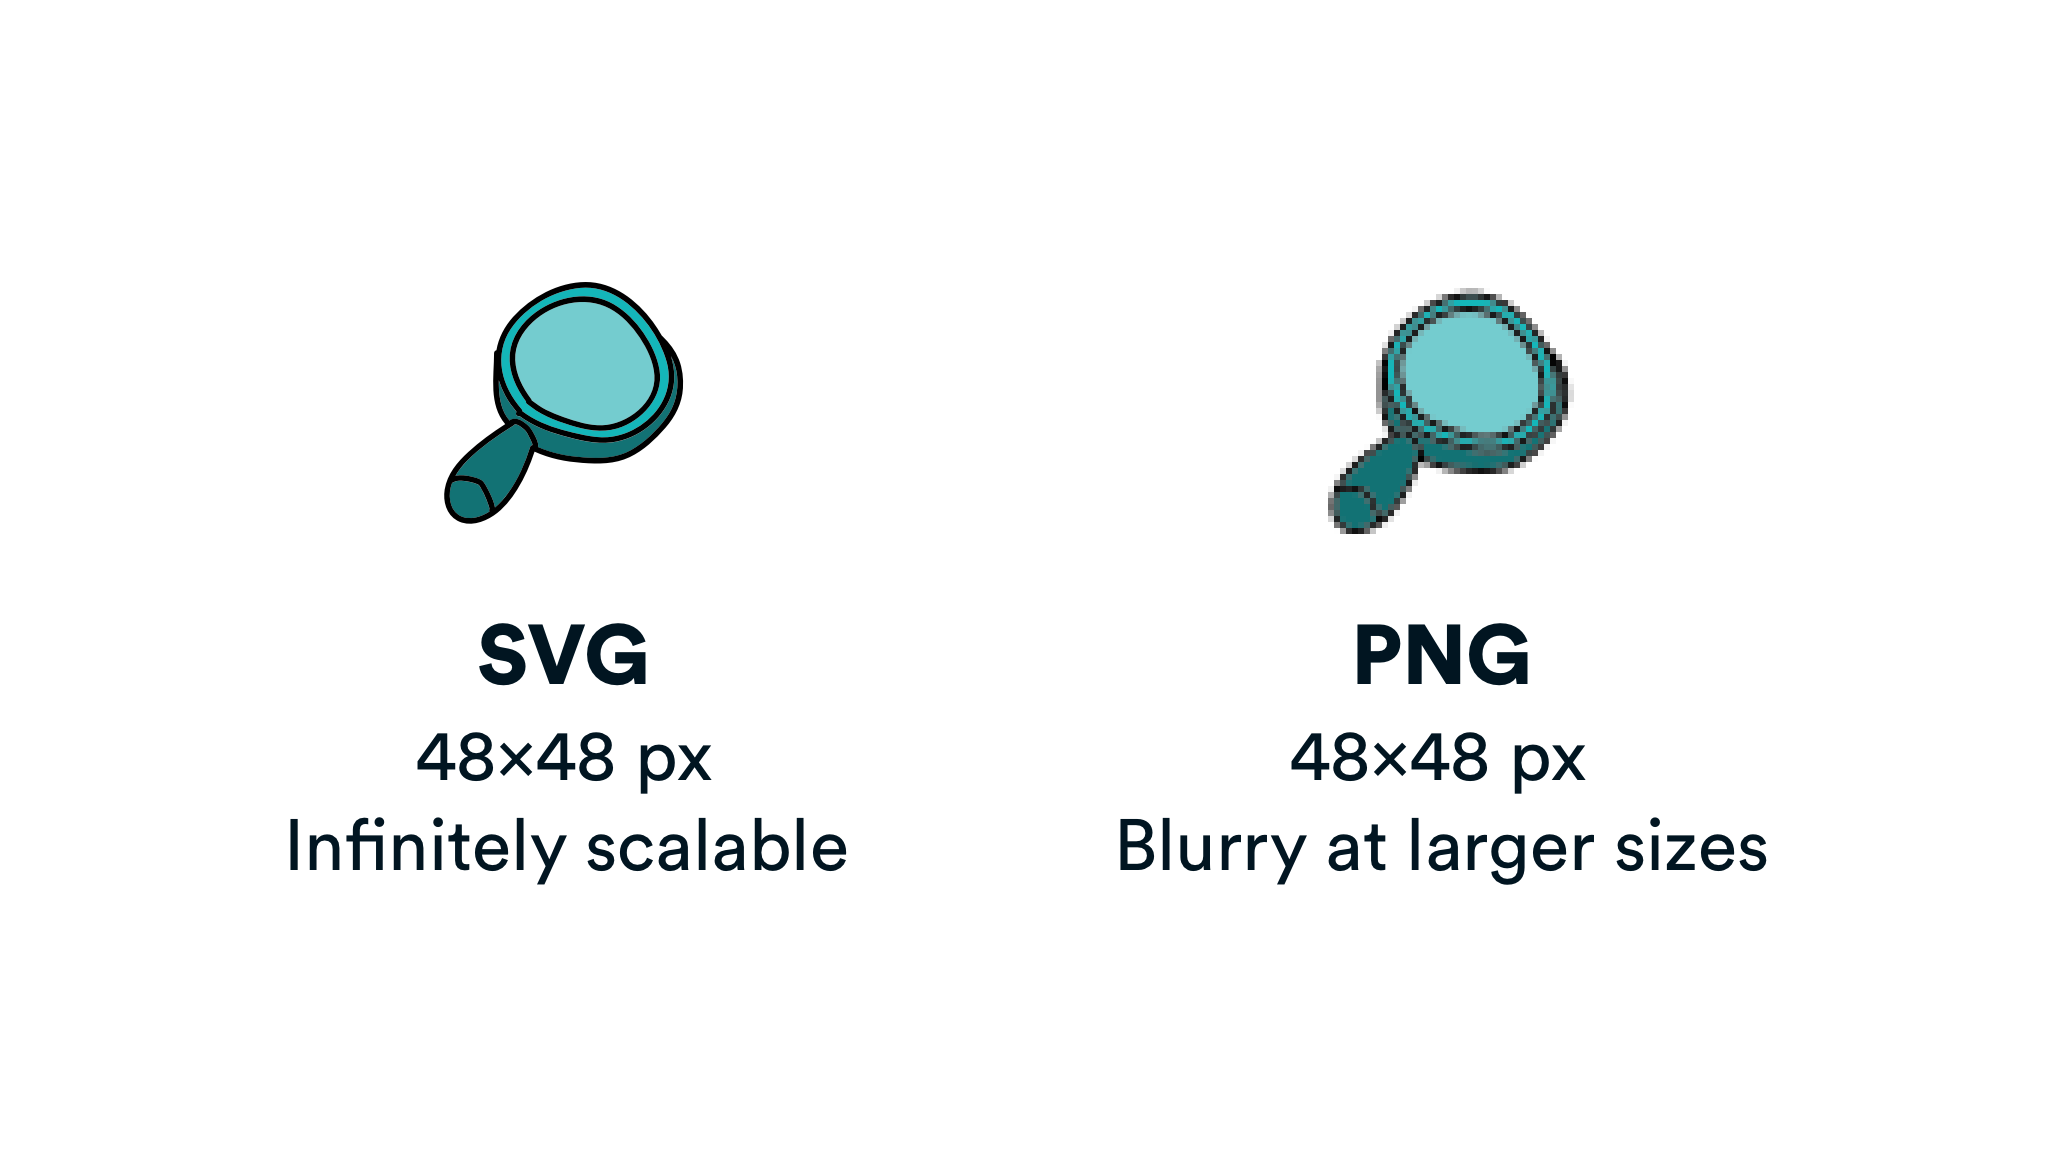 A side-by-side comparison of two 48x48 pixel images. One is an infinitely scalable SVG while the other is a blurry PNG image.